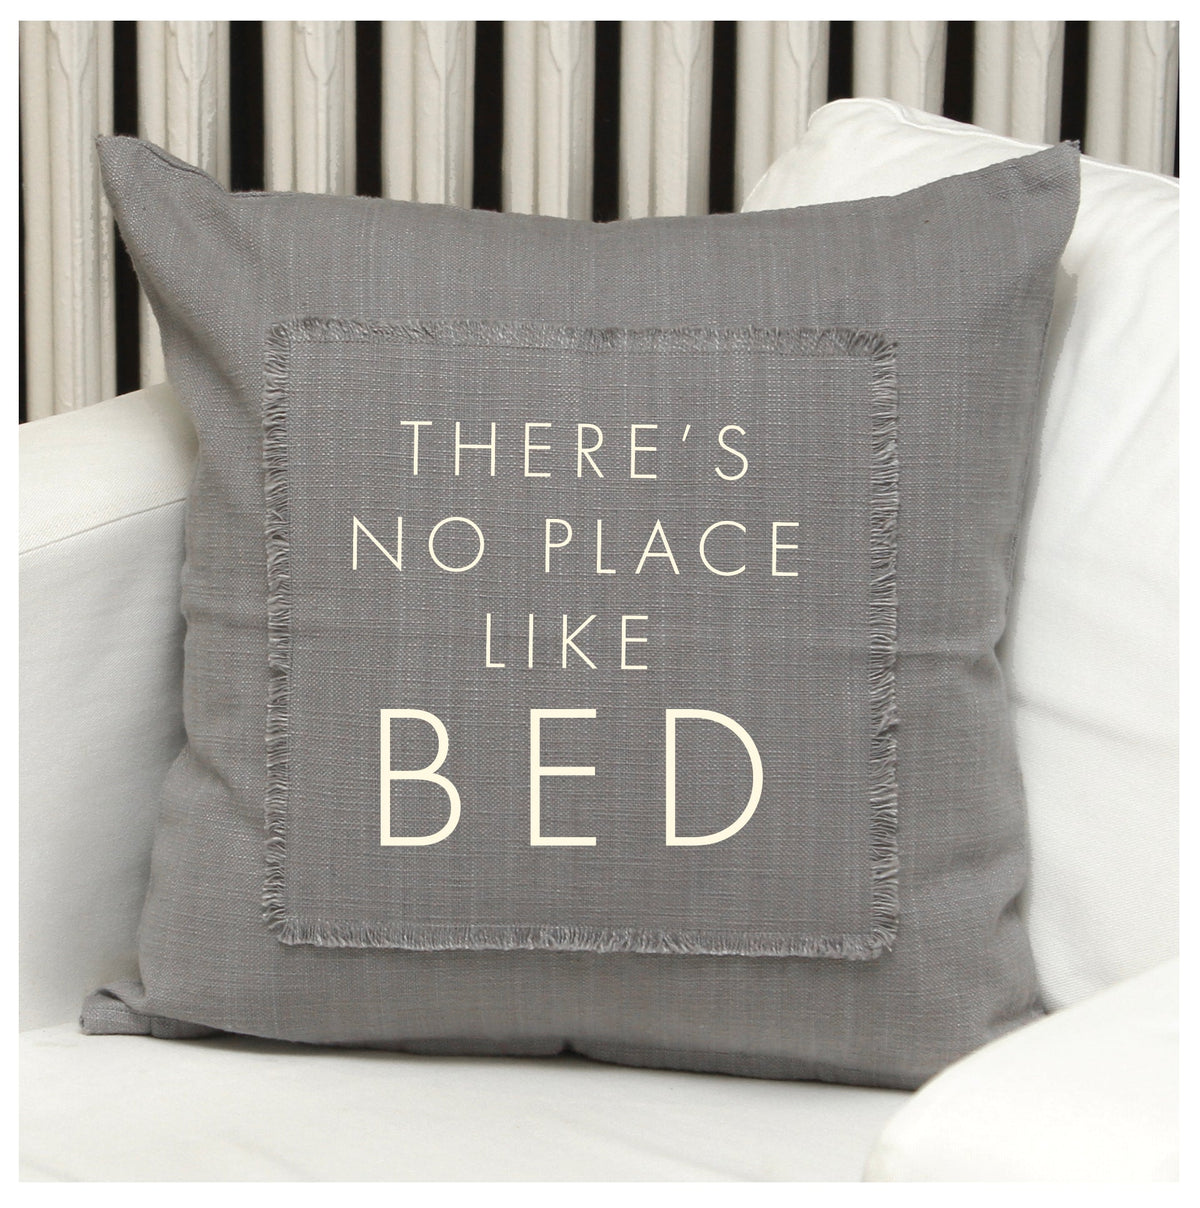 There's no place like bed Pillow